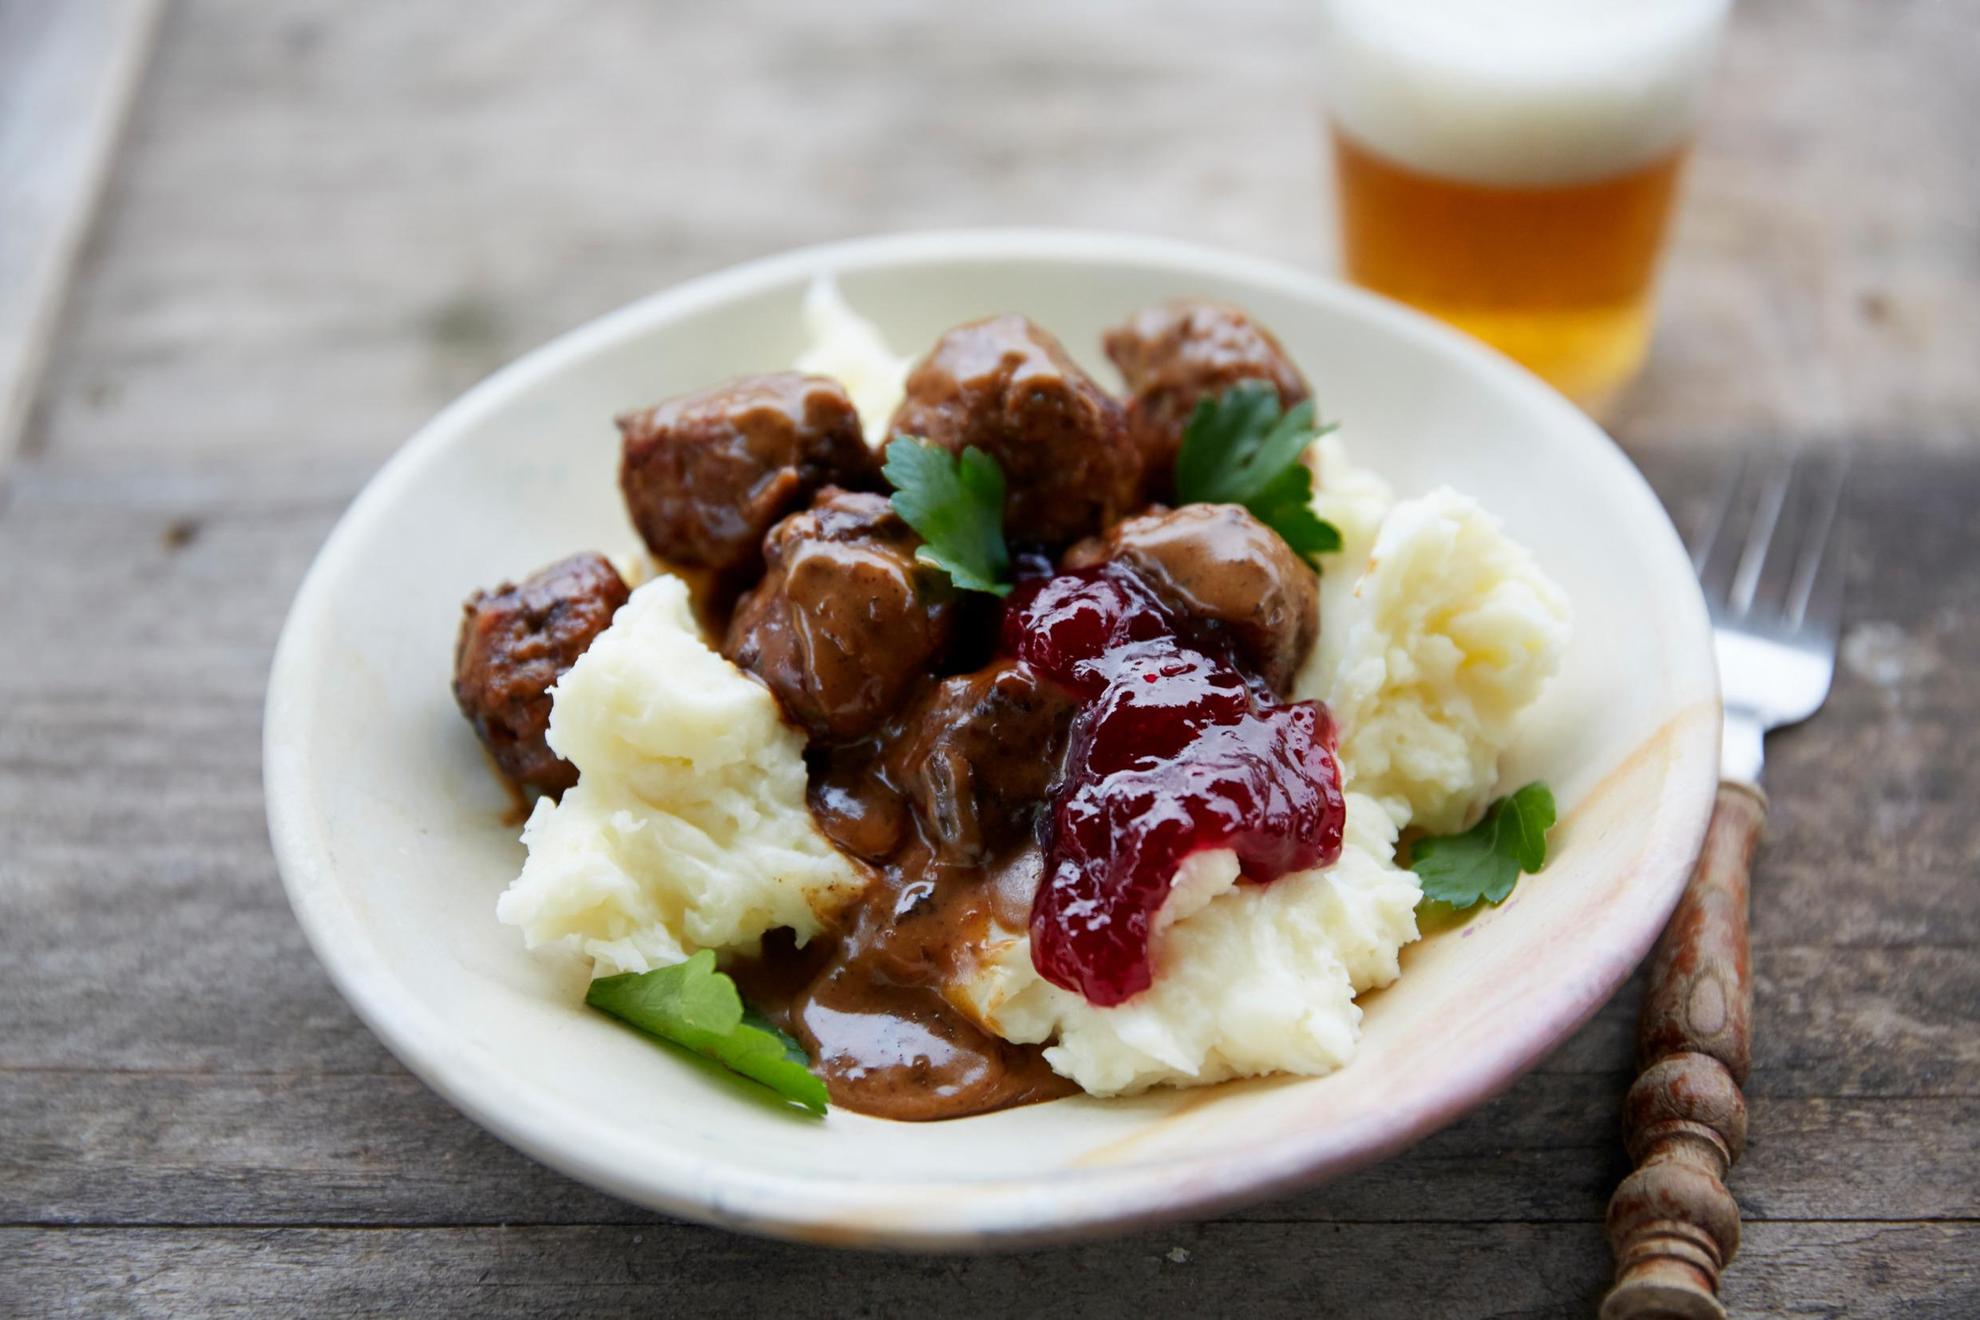 A wooden table is set with a glass of beer, a fork and a plate of meatballs with mashed potatoes, lingonberry jam and brown gravy.